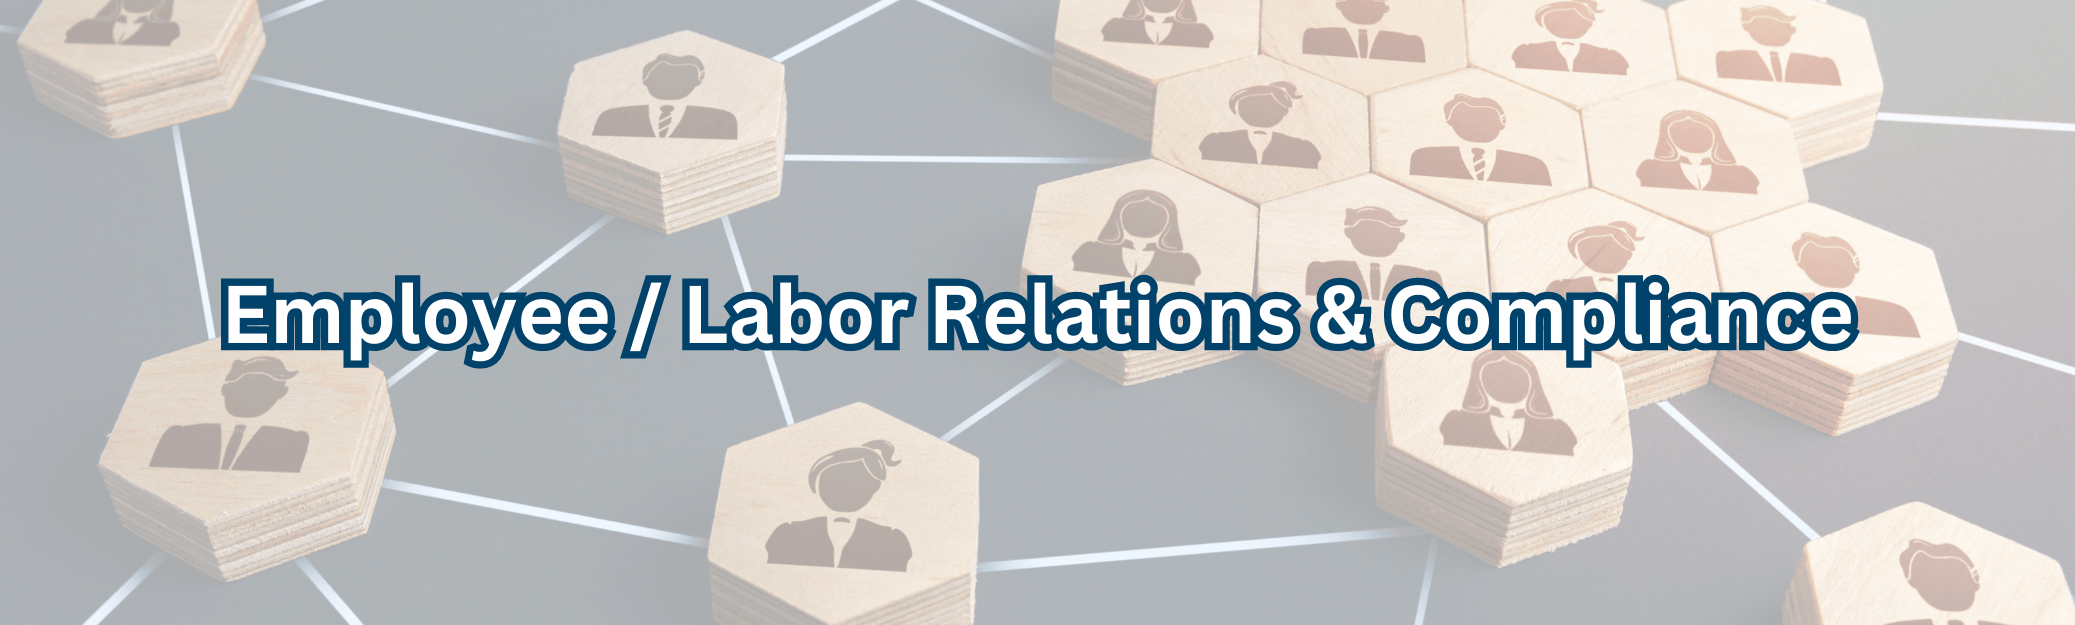 Employee/Labor Relations & Compliance banner